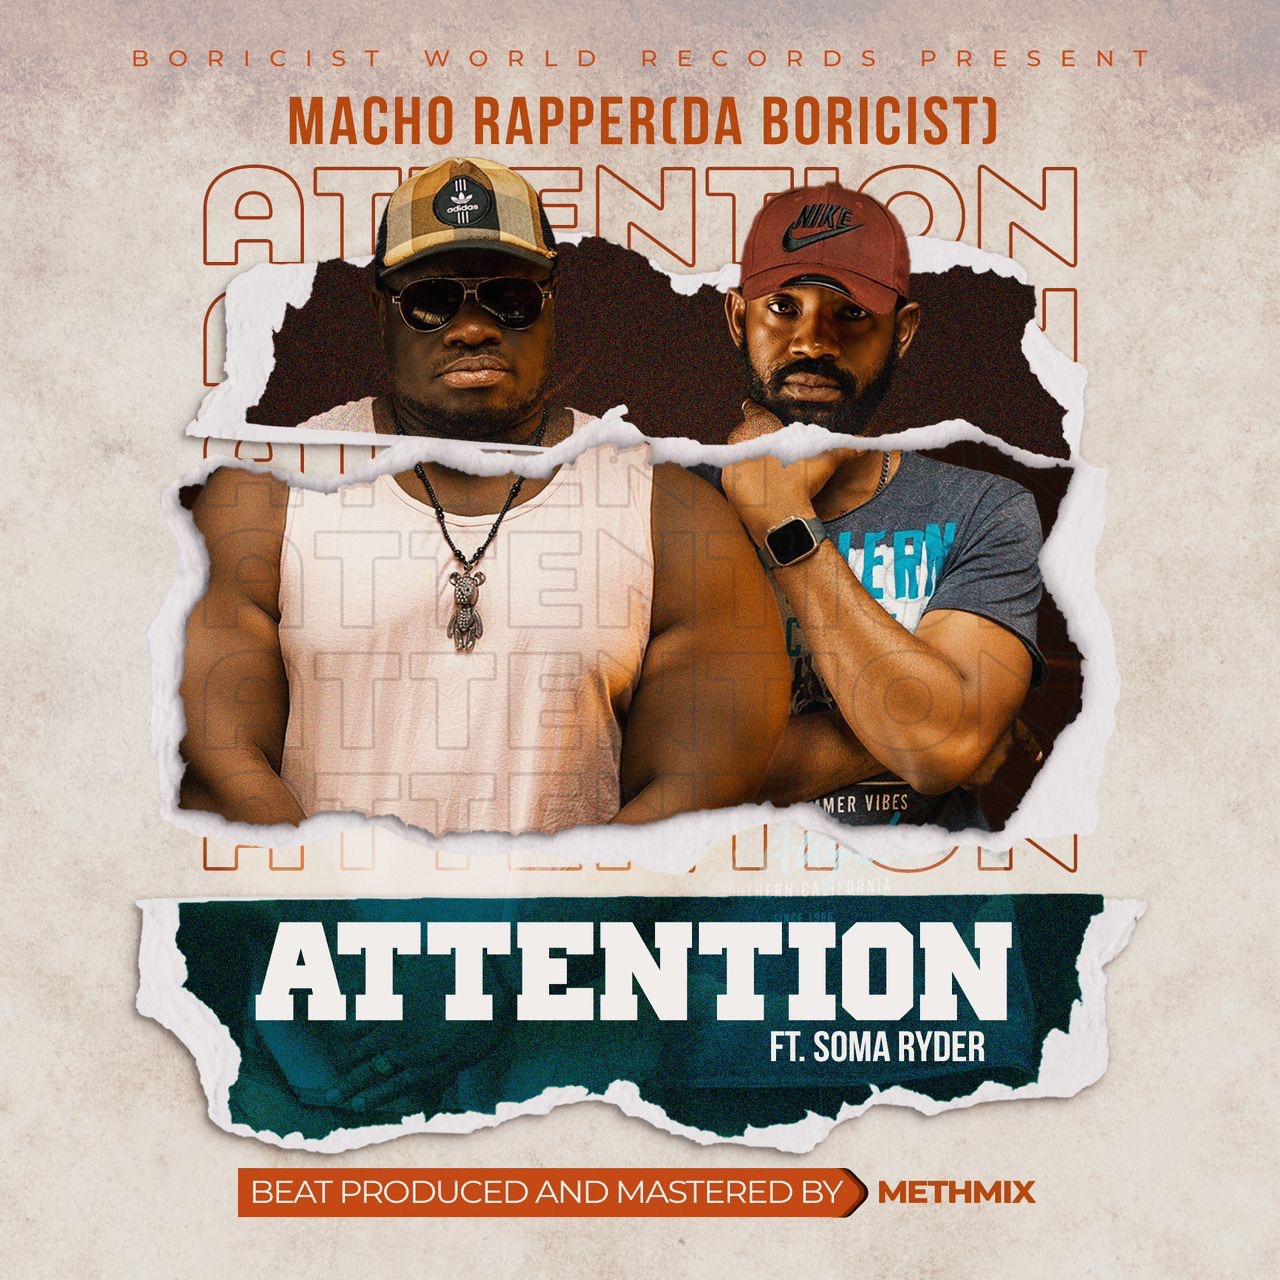 Macho Rapper releases ‘ATTENTION’ featuring Soma Rider.